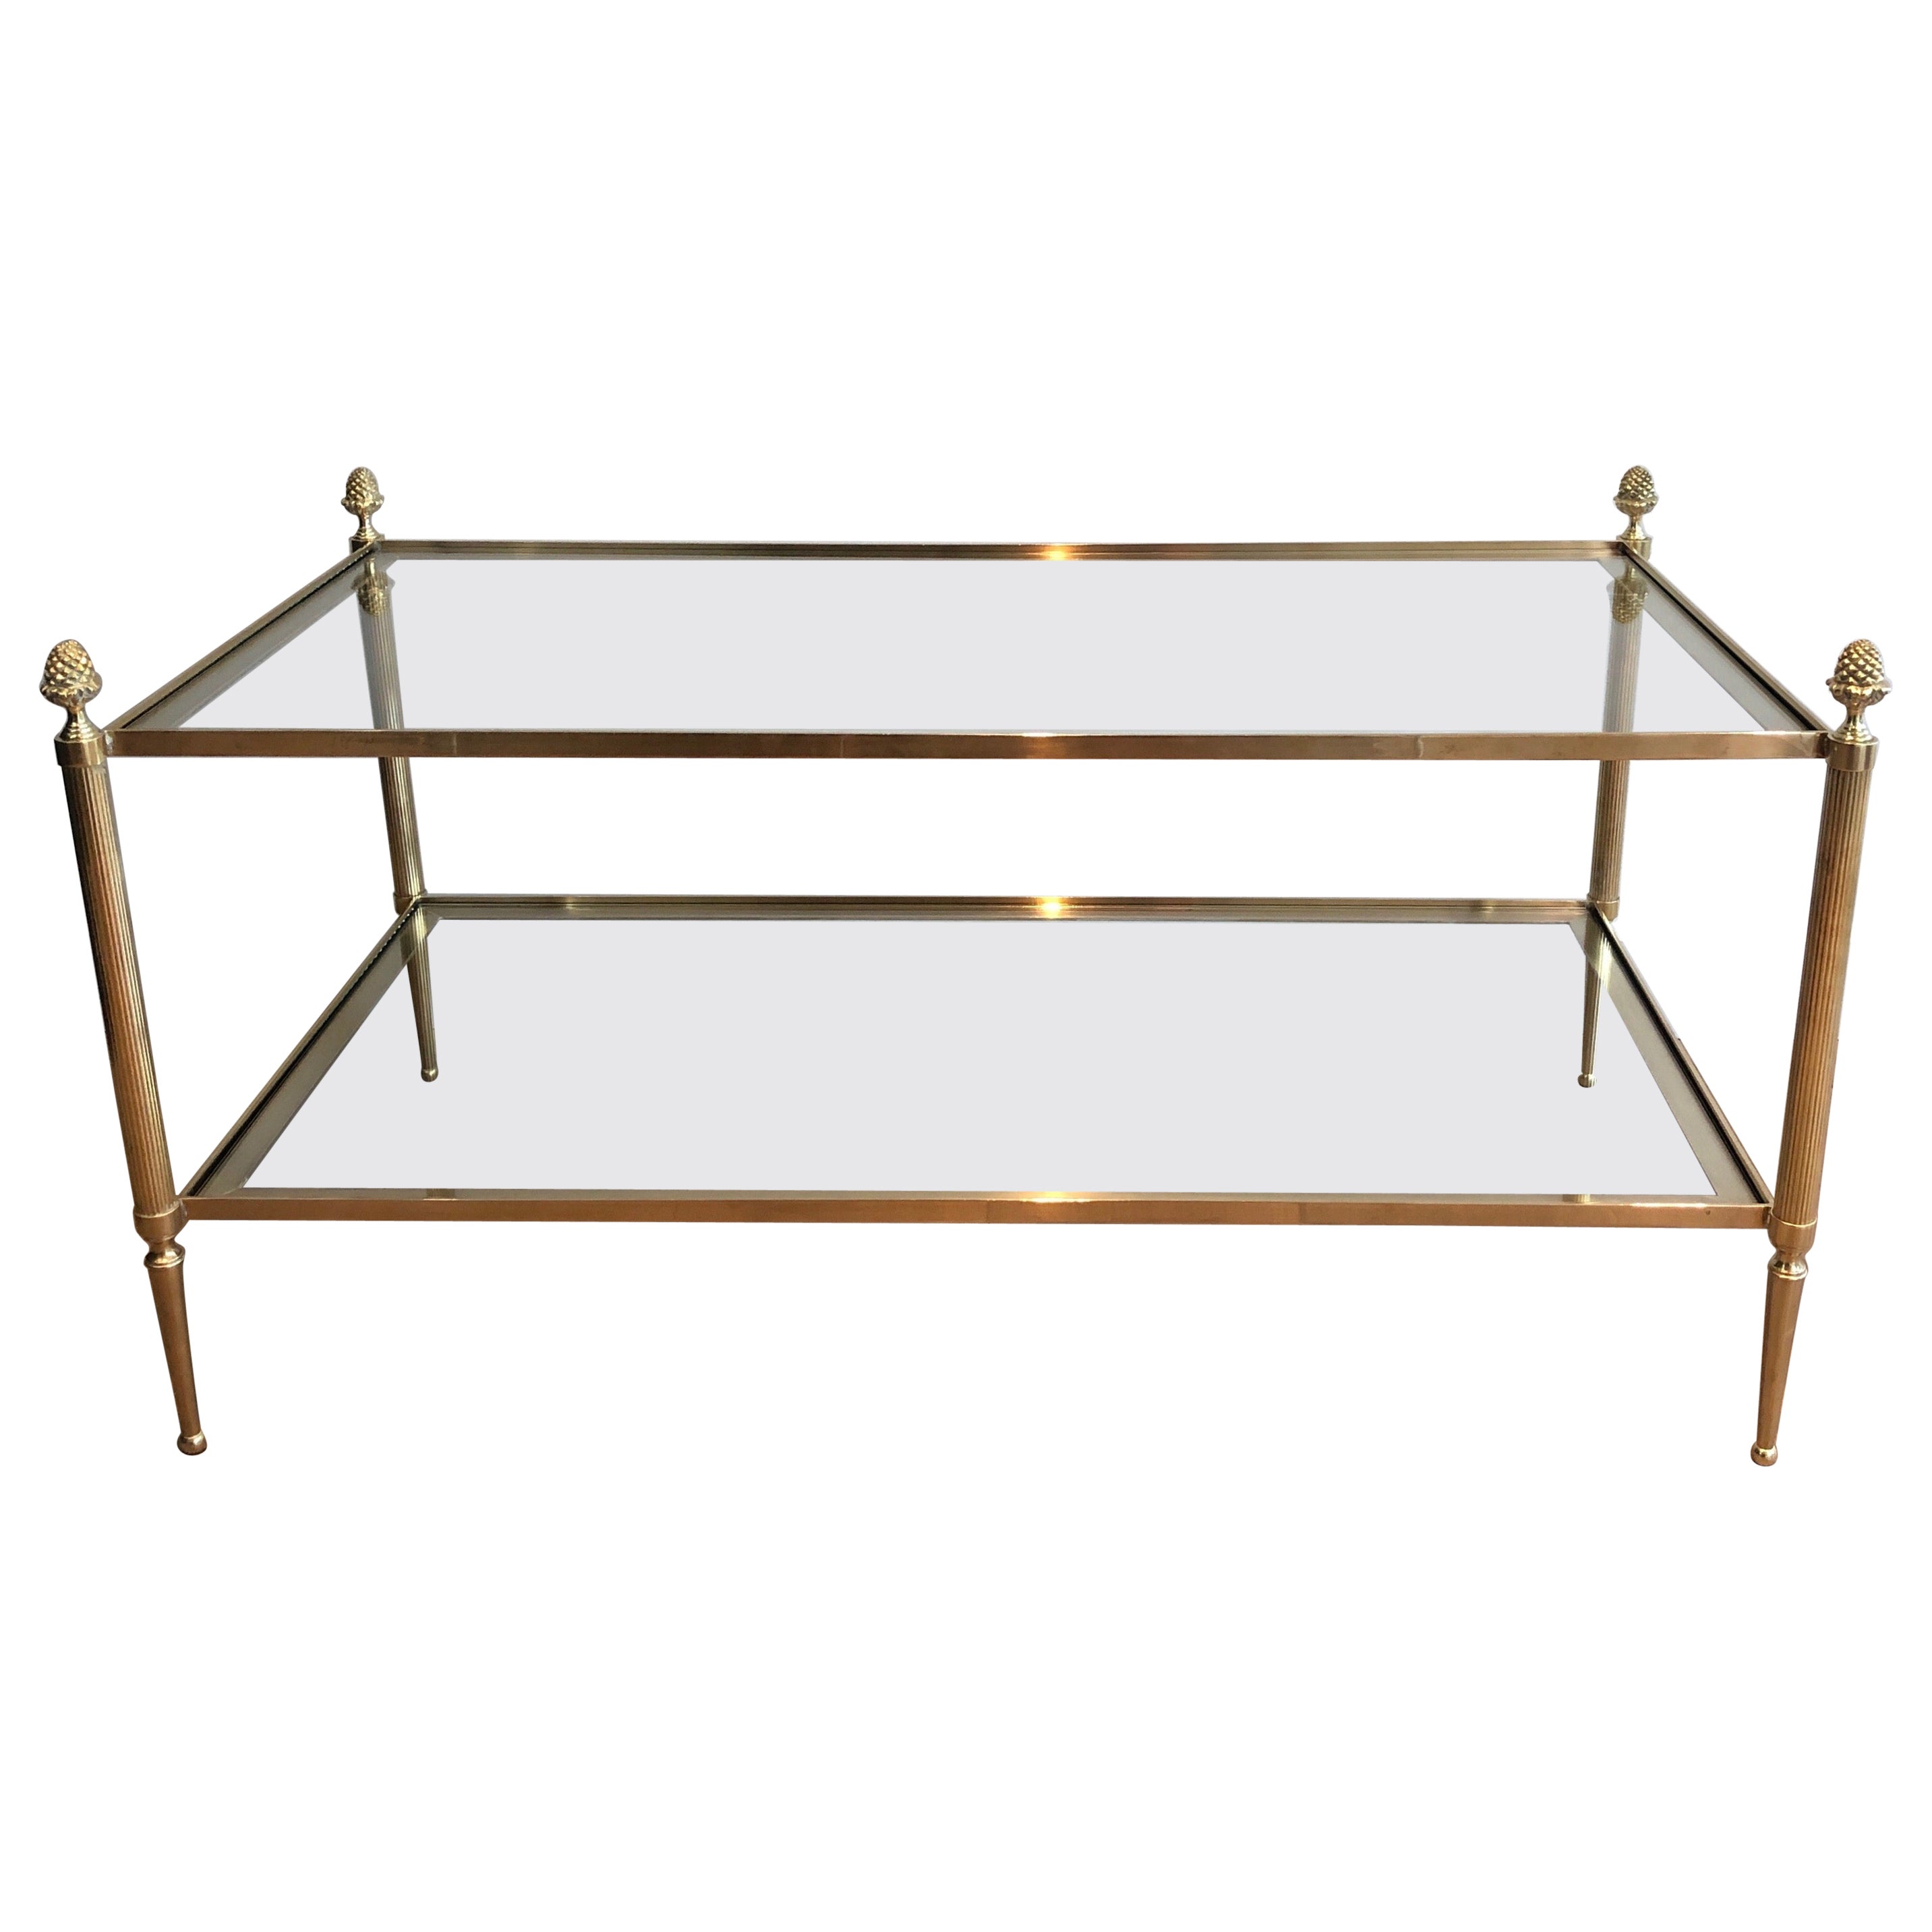 Neoclassical Style Maison Baguès Two Tiers Brass Coffee Table. Circa 1940 For Sale